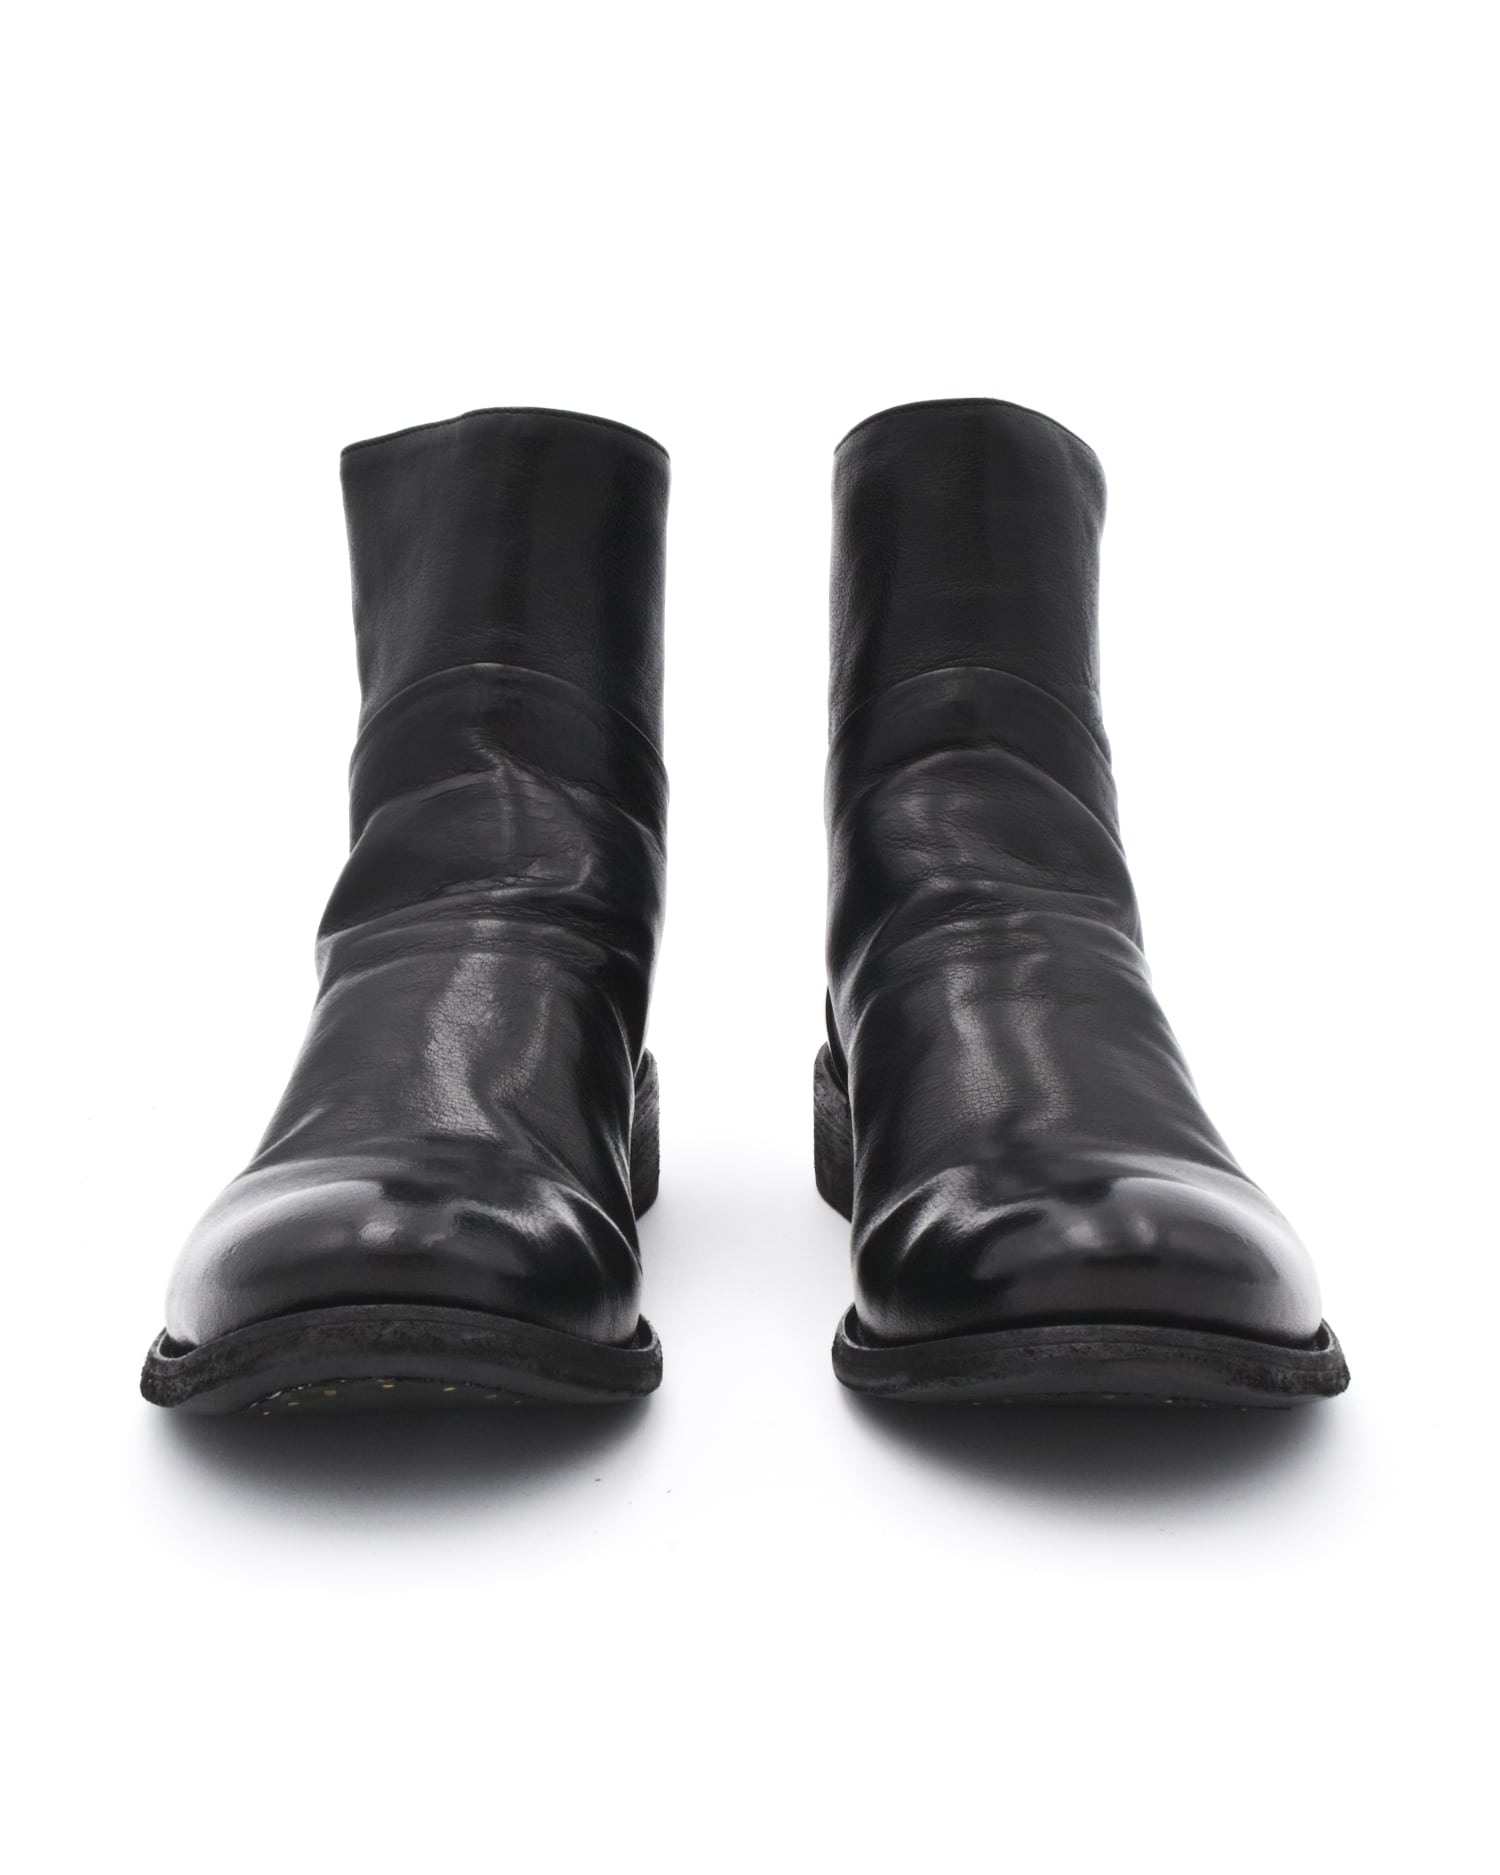 Lison Black Leather Ankle Boot